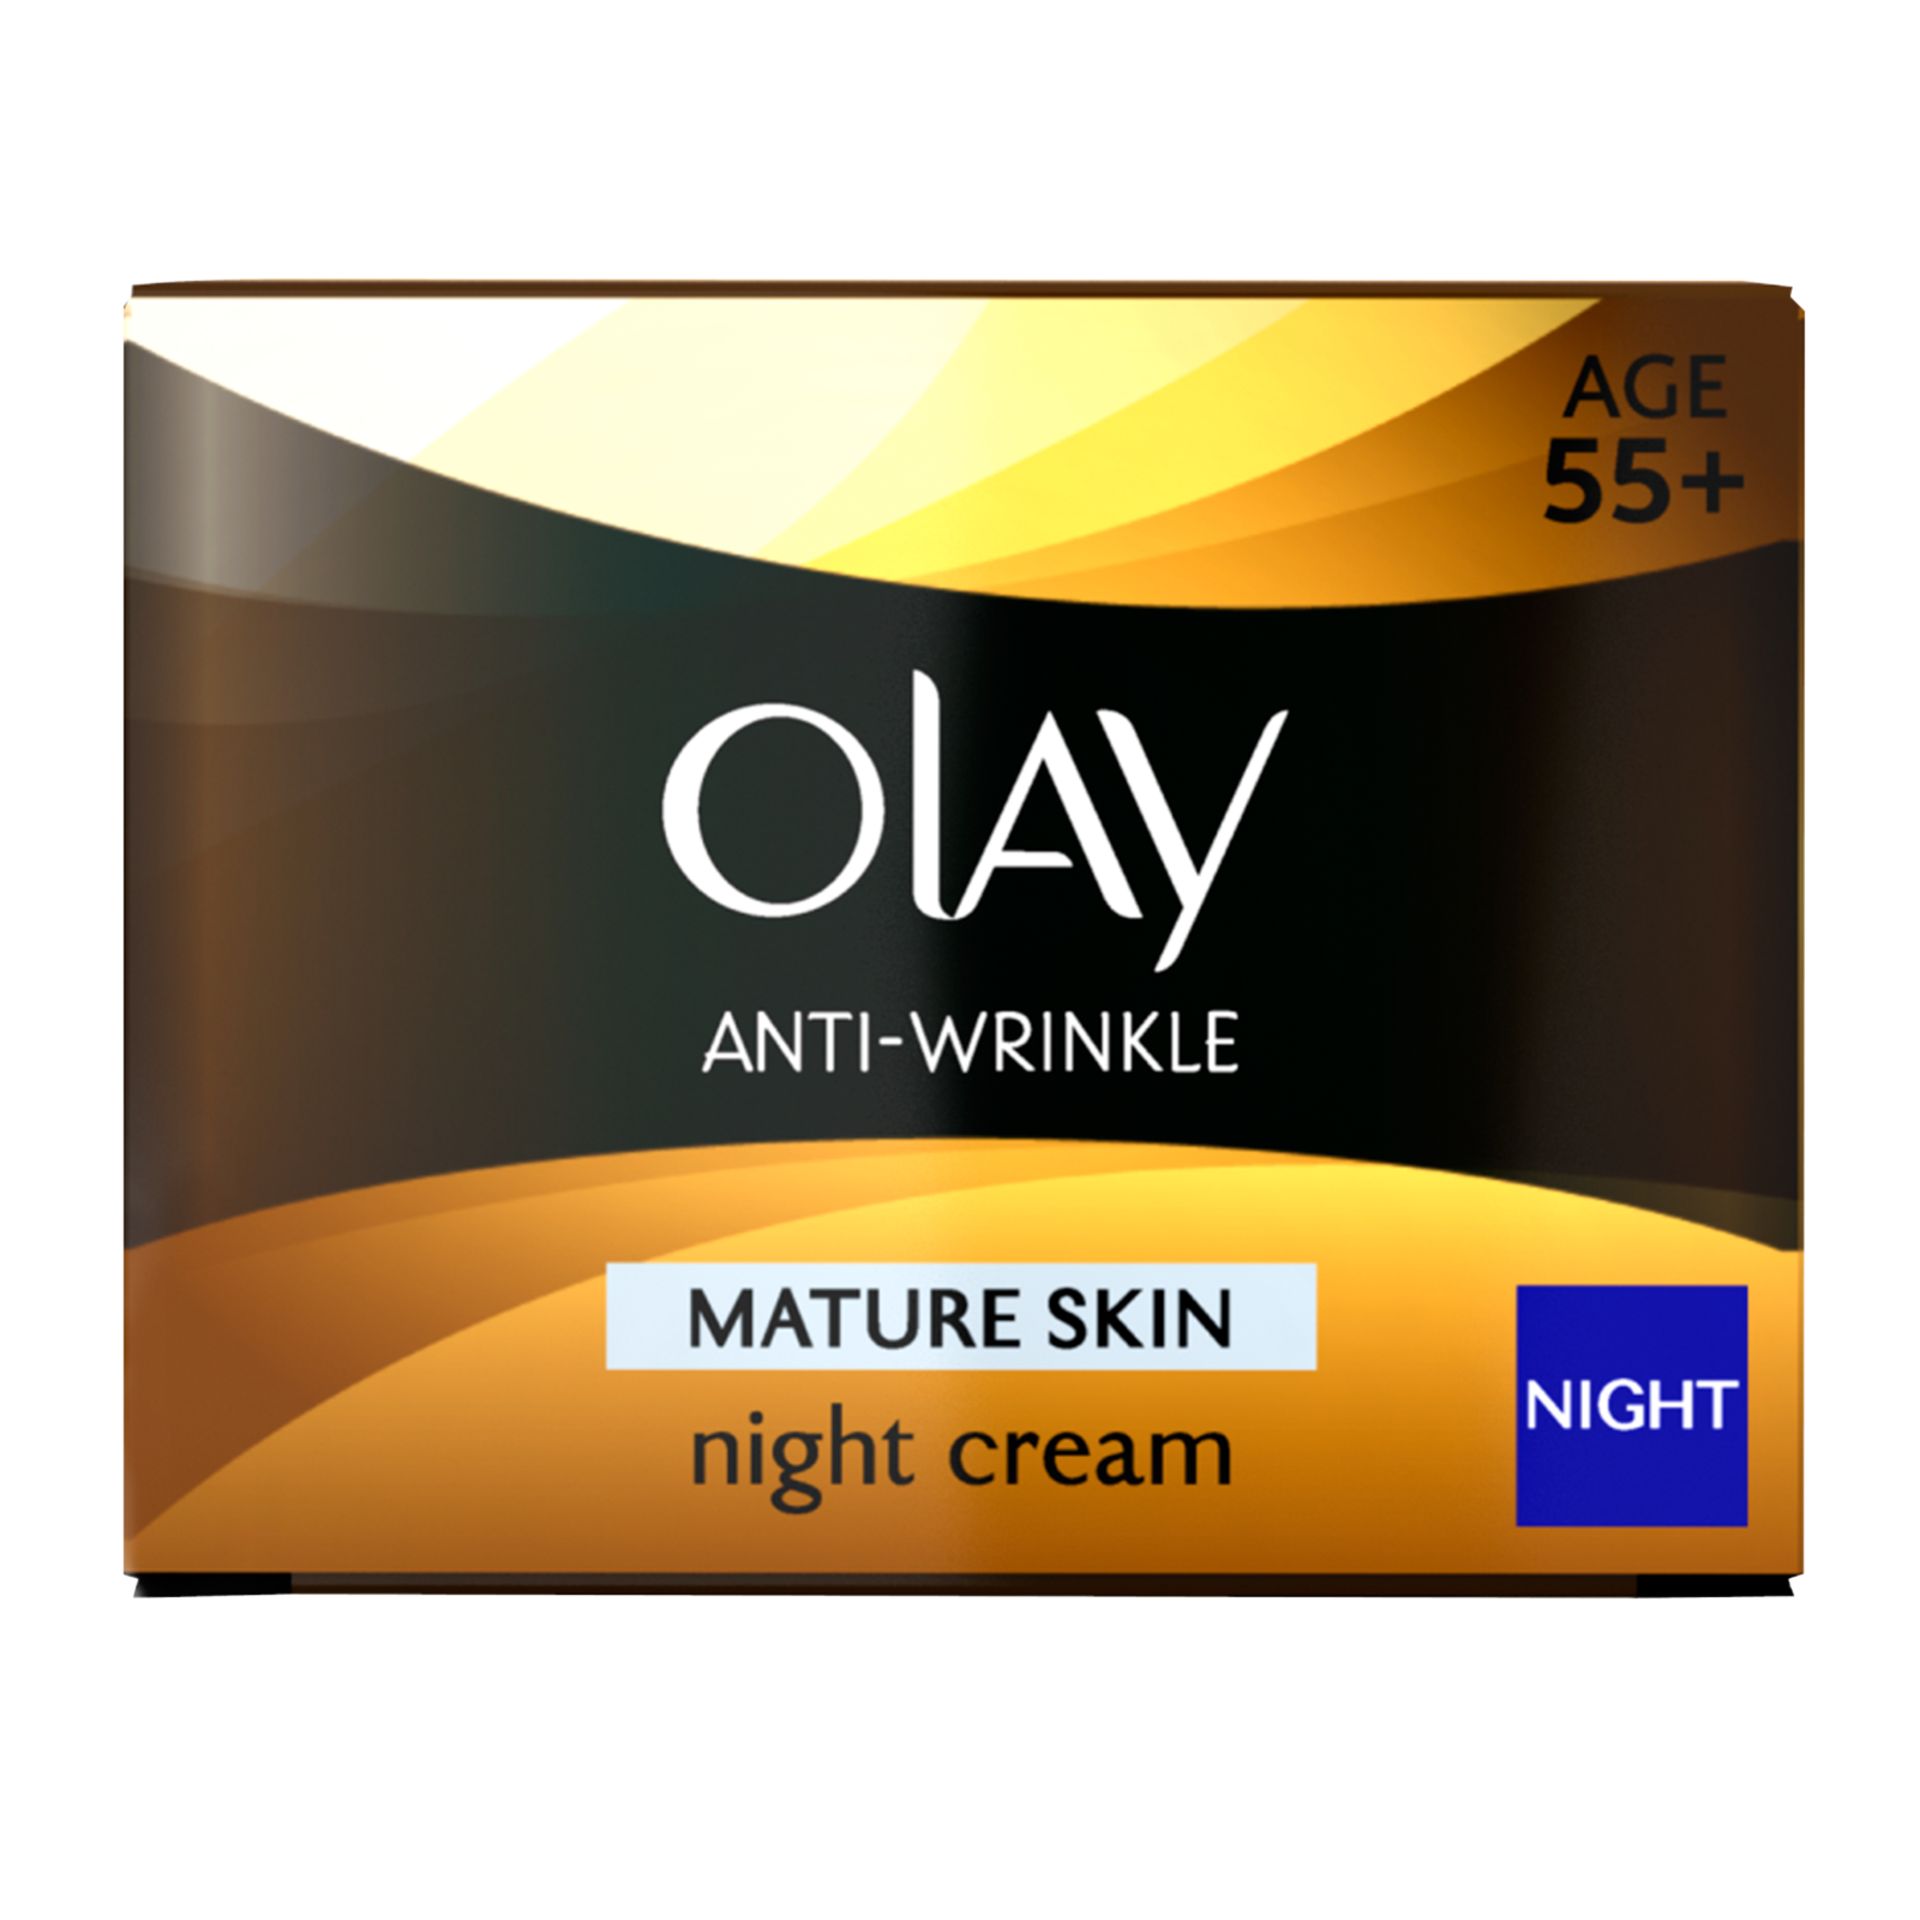 V Brand New Olay Anti-Wrinkle Night Cream 50 ml/55+ X 2 YOUR BID PRICE TO BE MULTIPLIED BY TWO